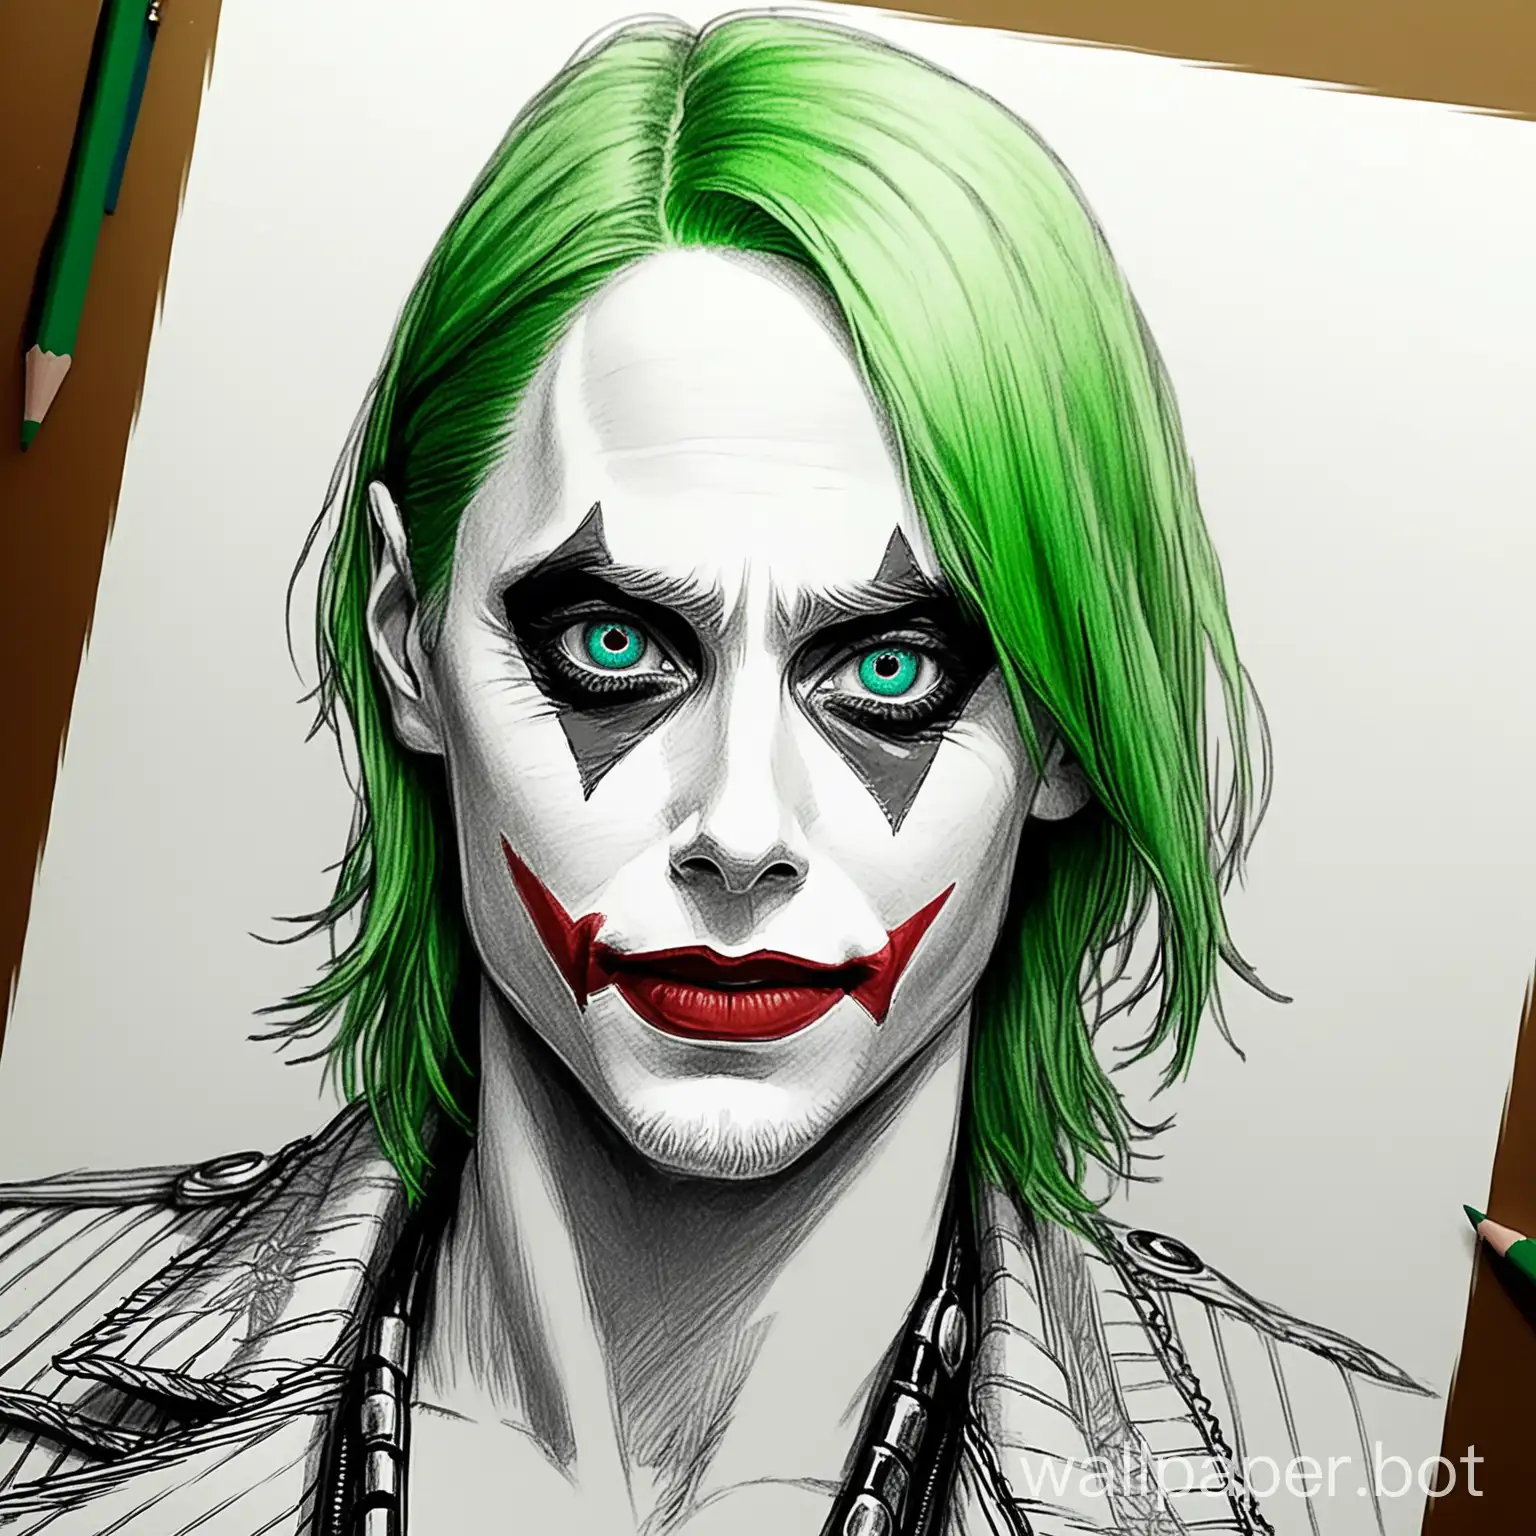 portrait drawing, jared leto like joker suicide squad, shirt green hair, pencil drawing, comic book style, sketch hatching masterpiece